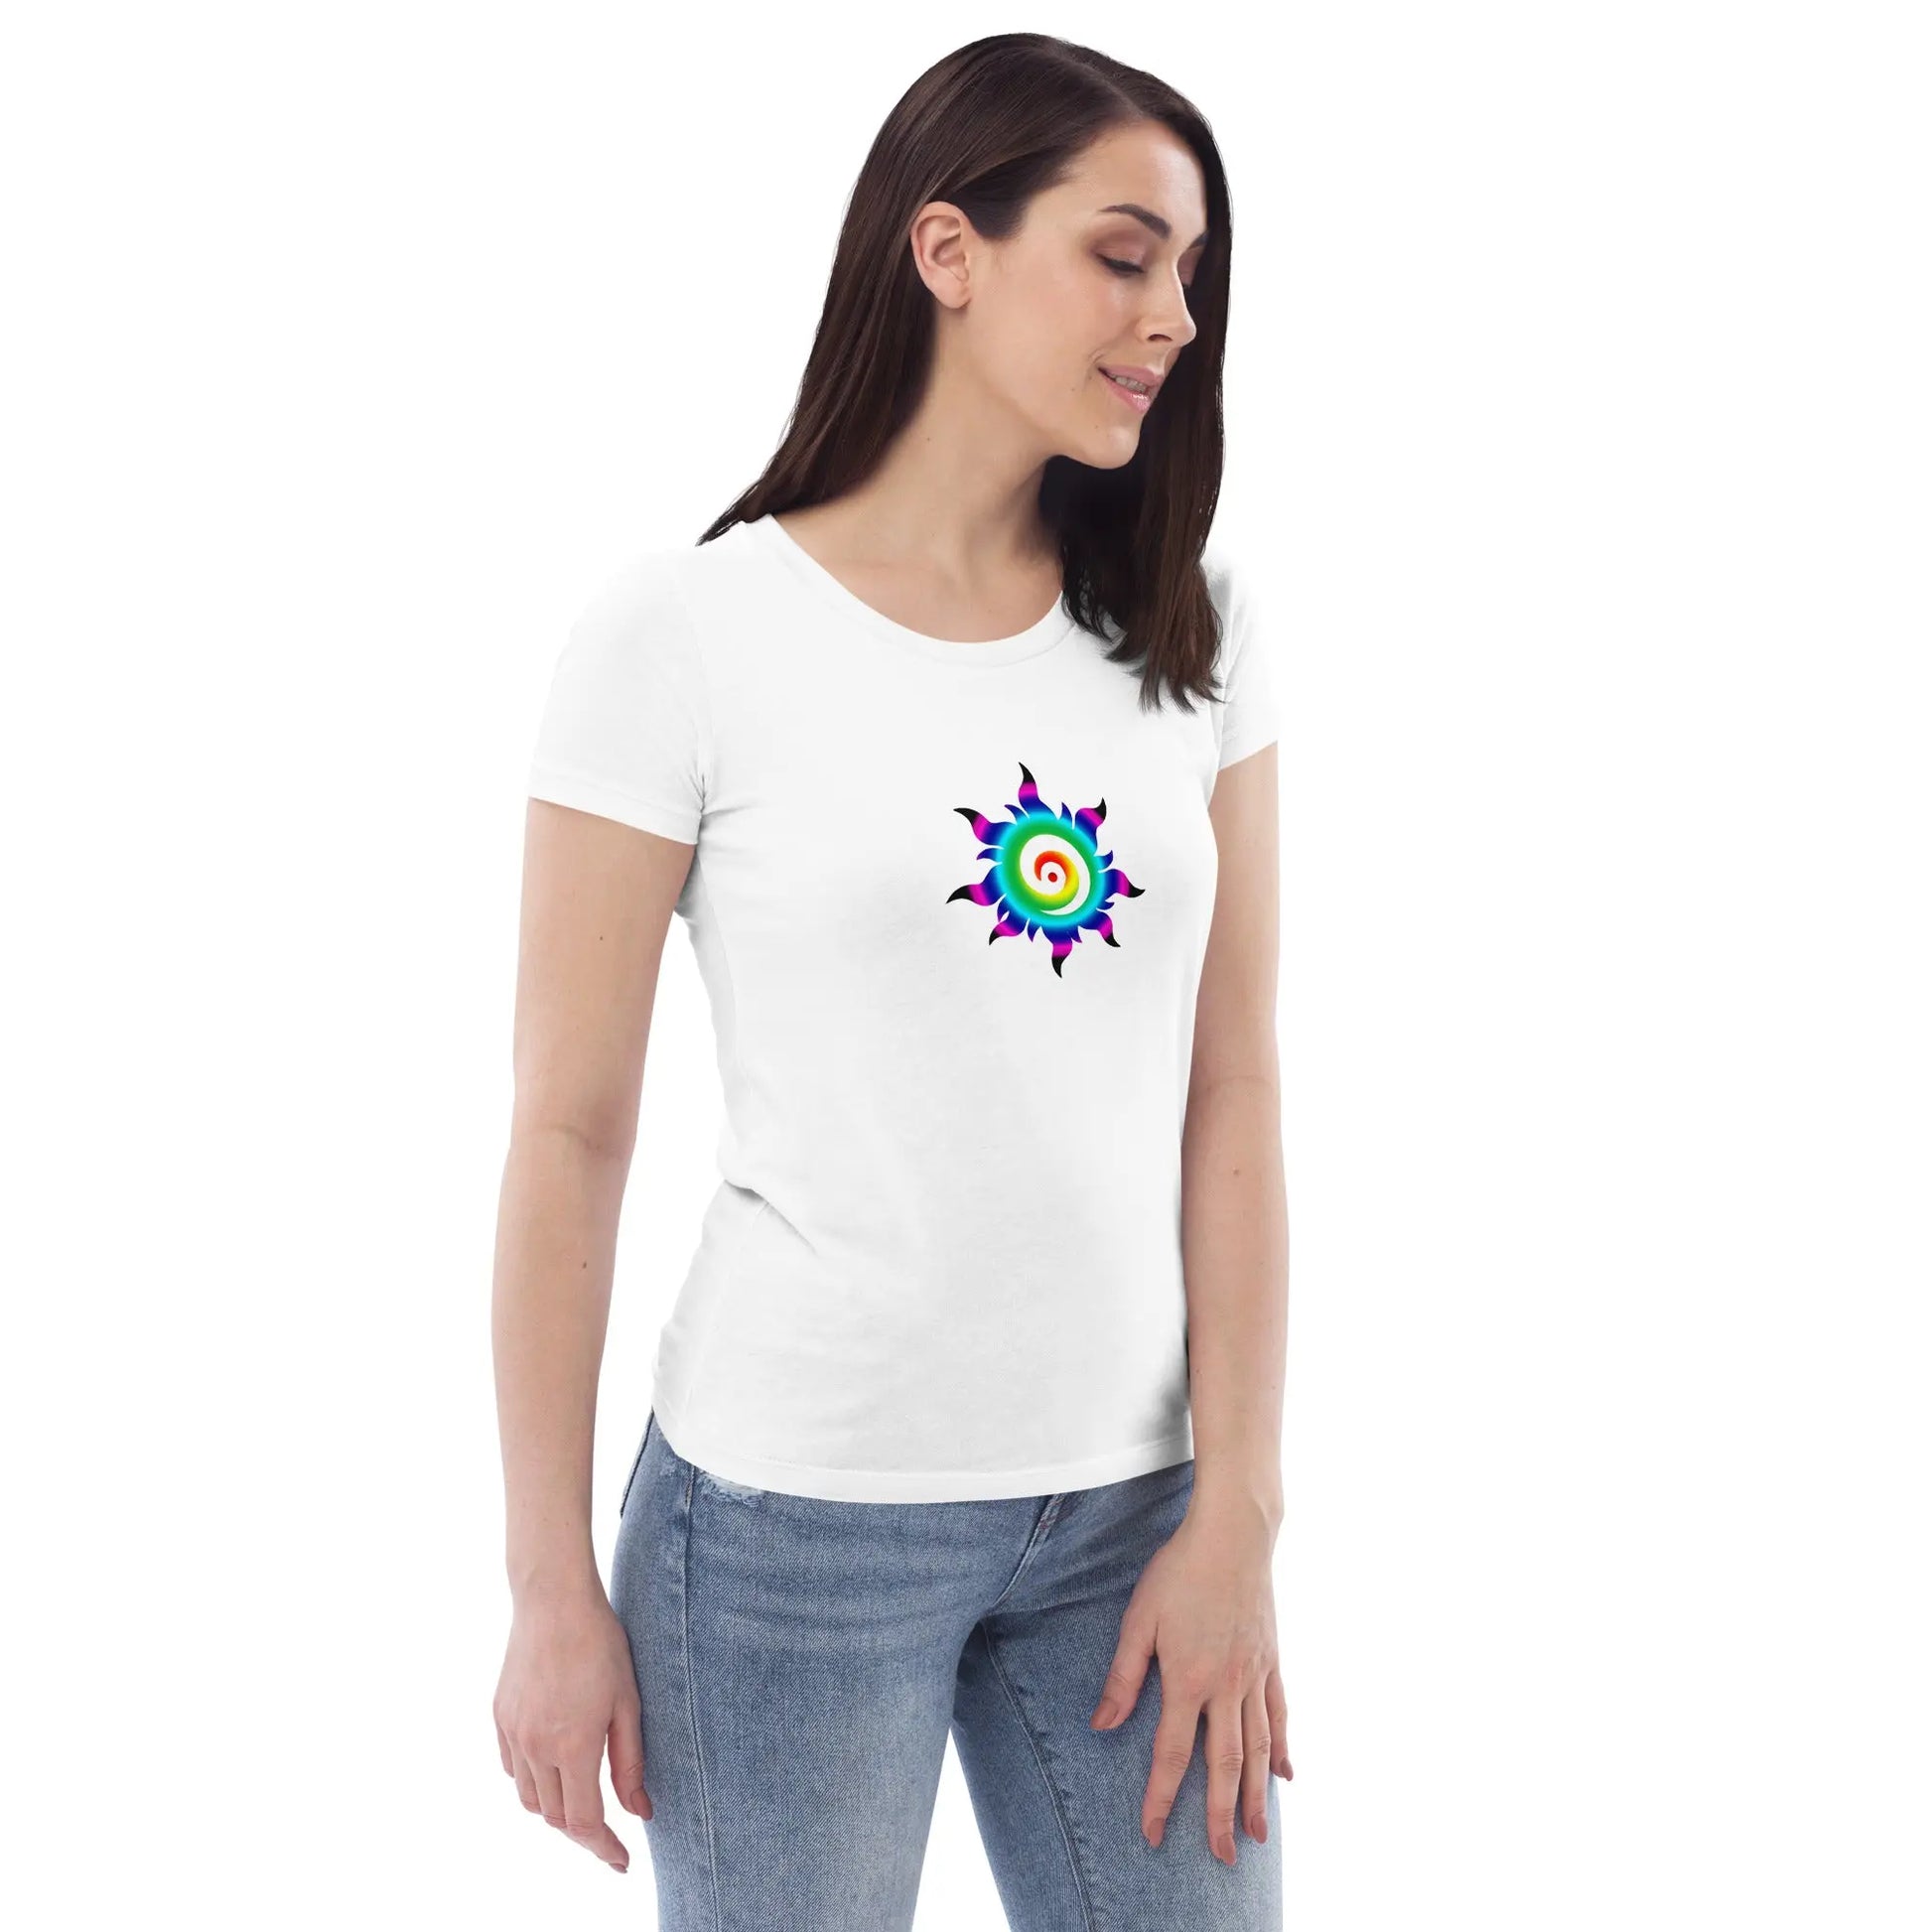 Women's fitted eco tee ActSunx - Image #23